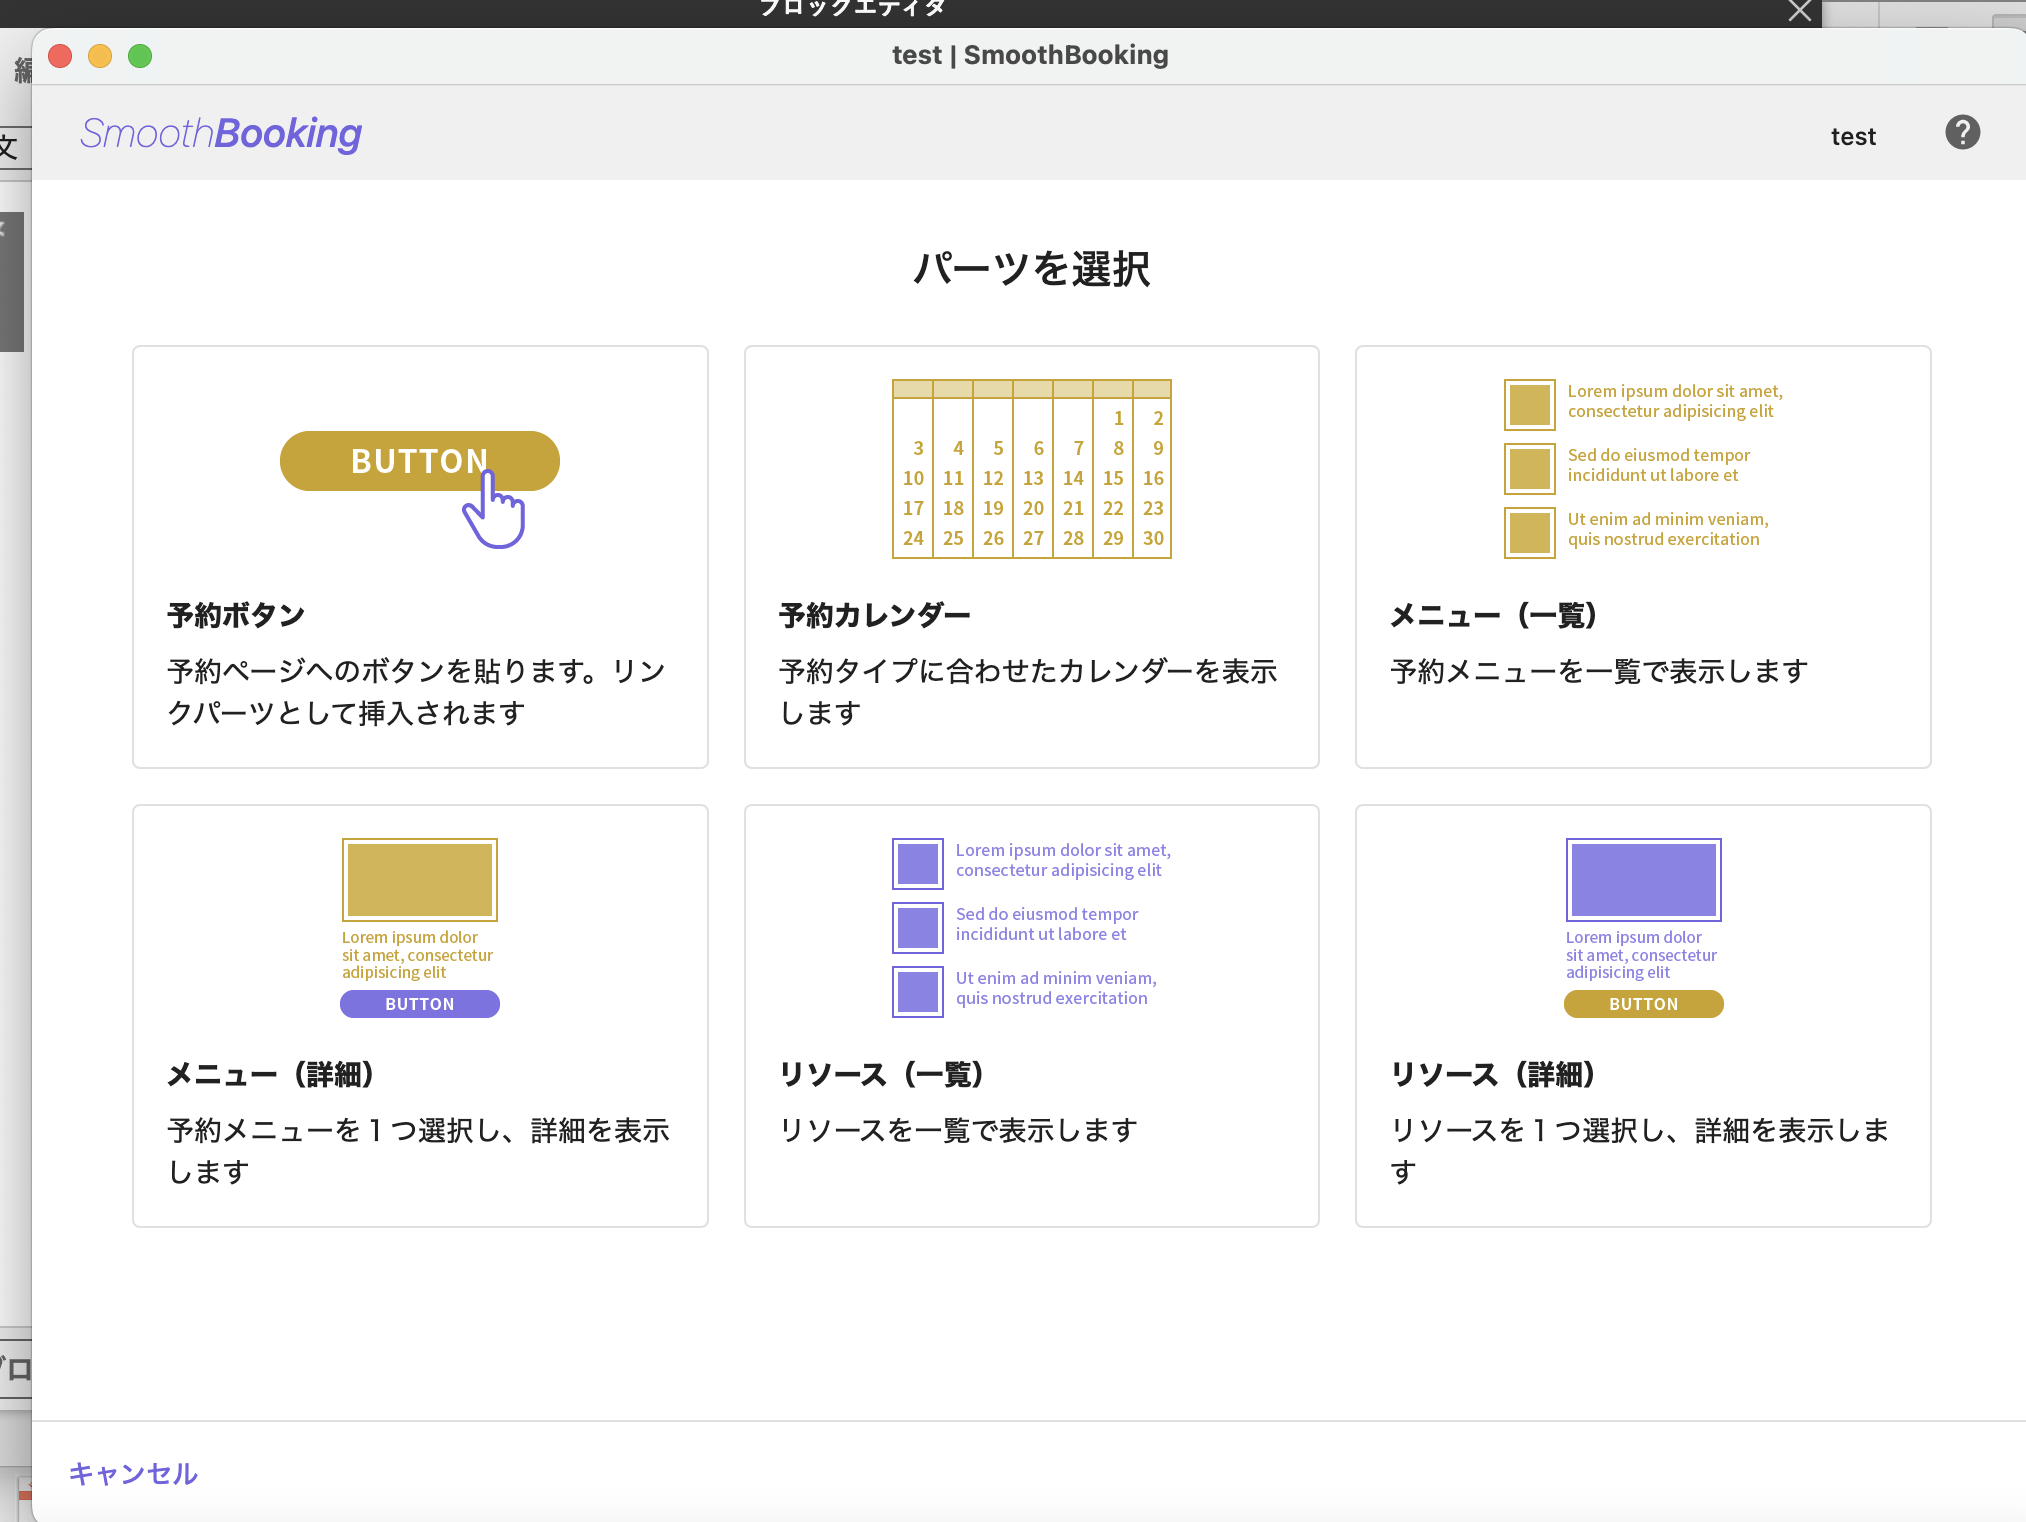 SmoothBookingの概要